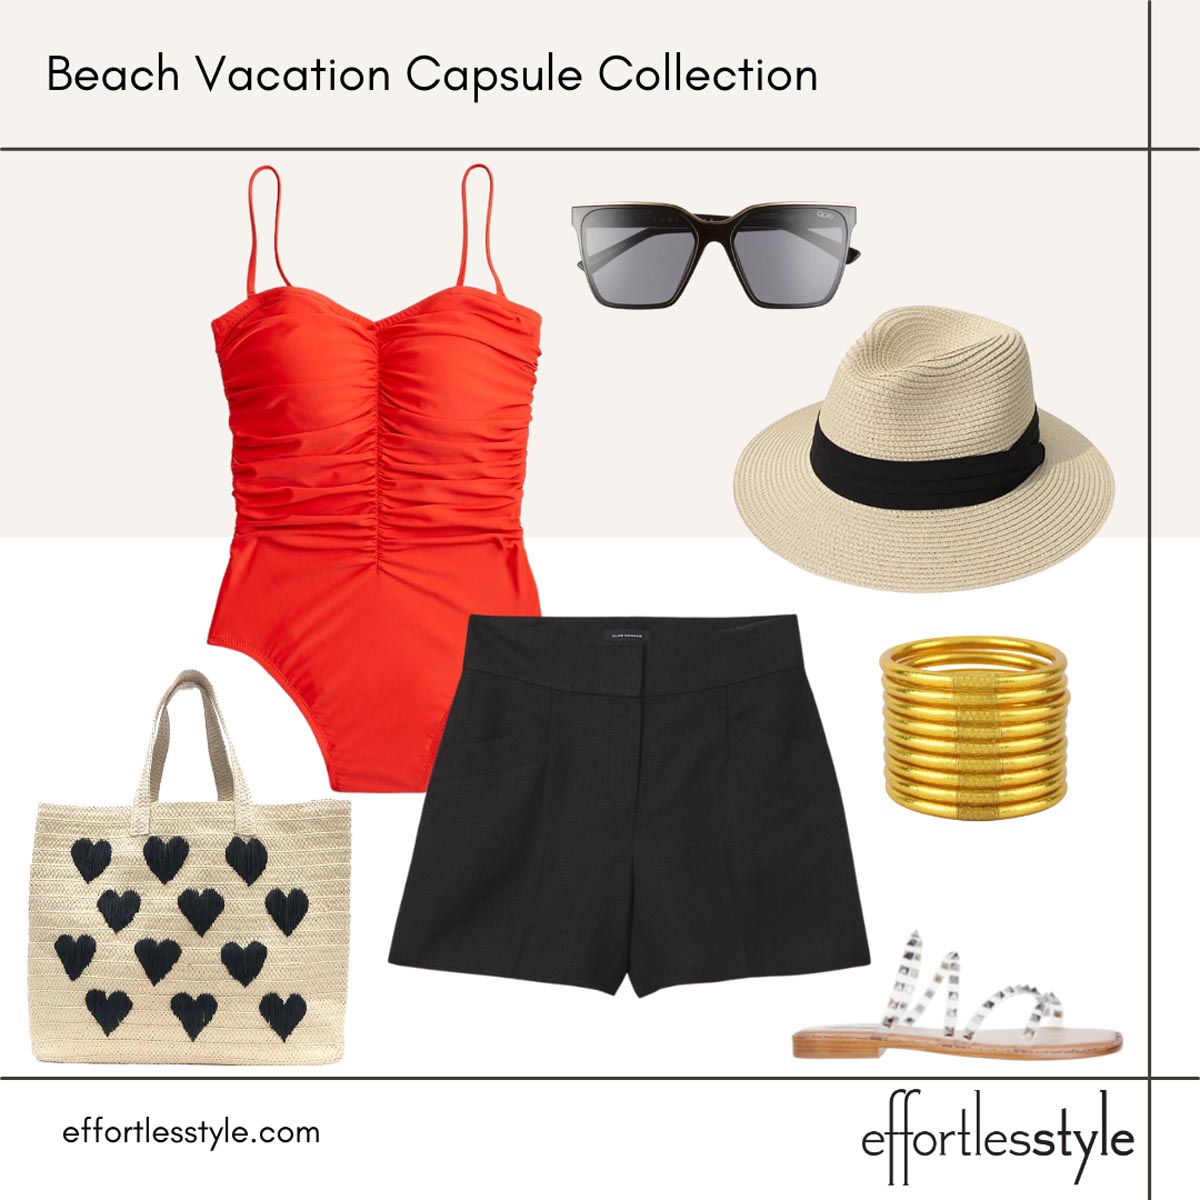 Beach vacation capsule styled looks swimsuit strapless swimsuit how to wear a swimsuit with shorts fun pool bag for summer straw tote for summer reasonably priced sunglasses all weather bangles water safe jewelry